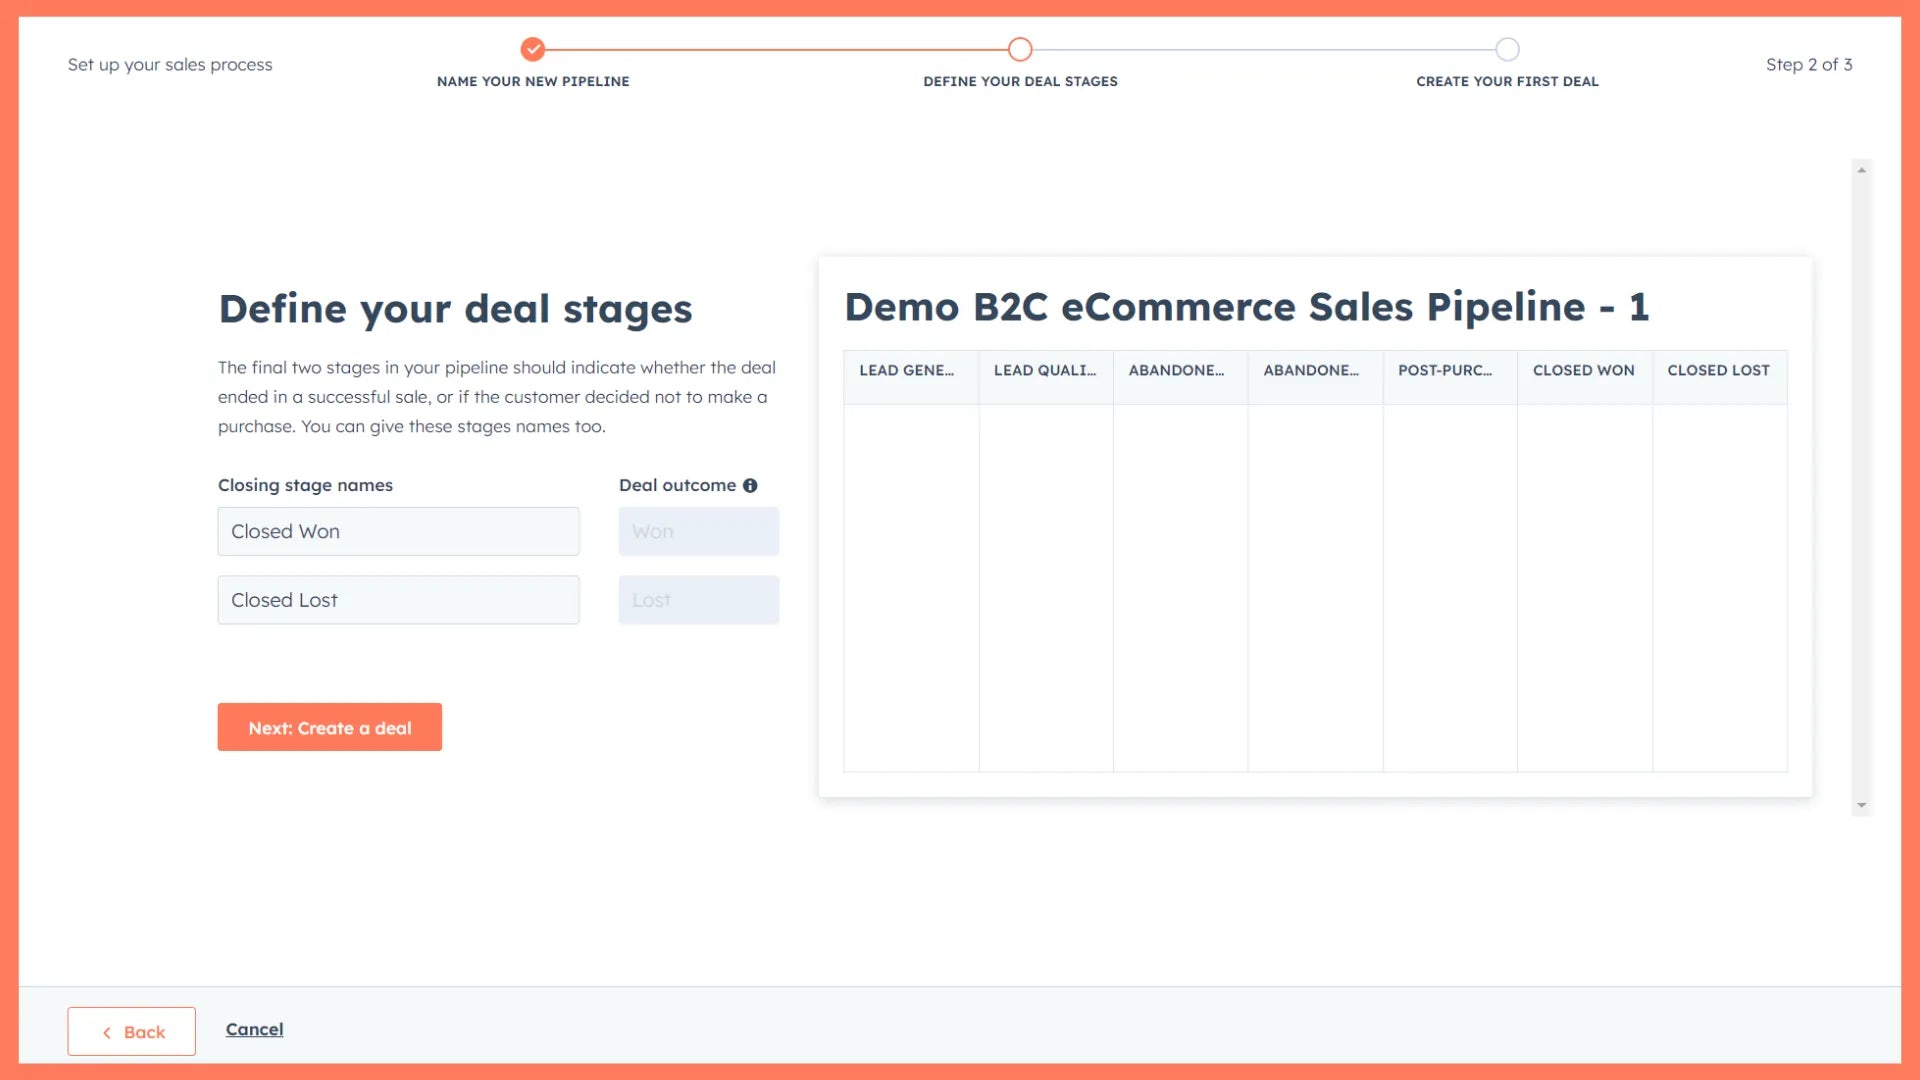 Deal configuration in the HubSpot CRM